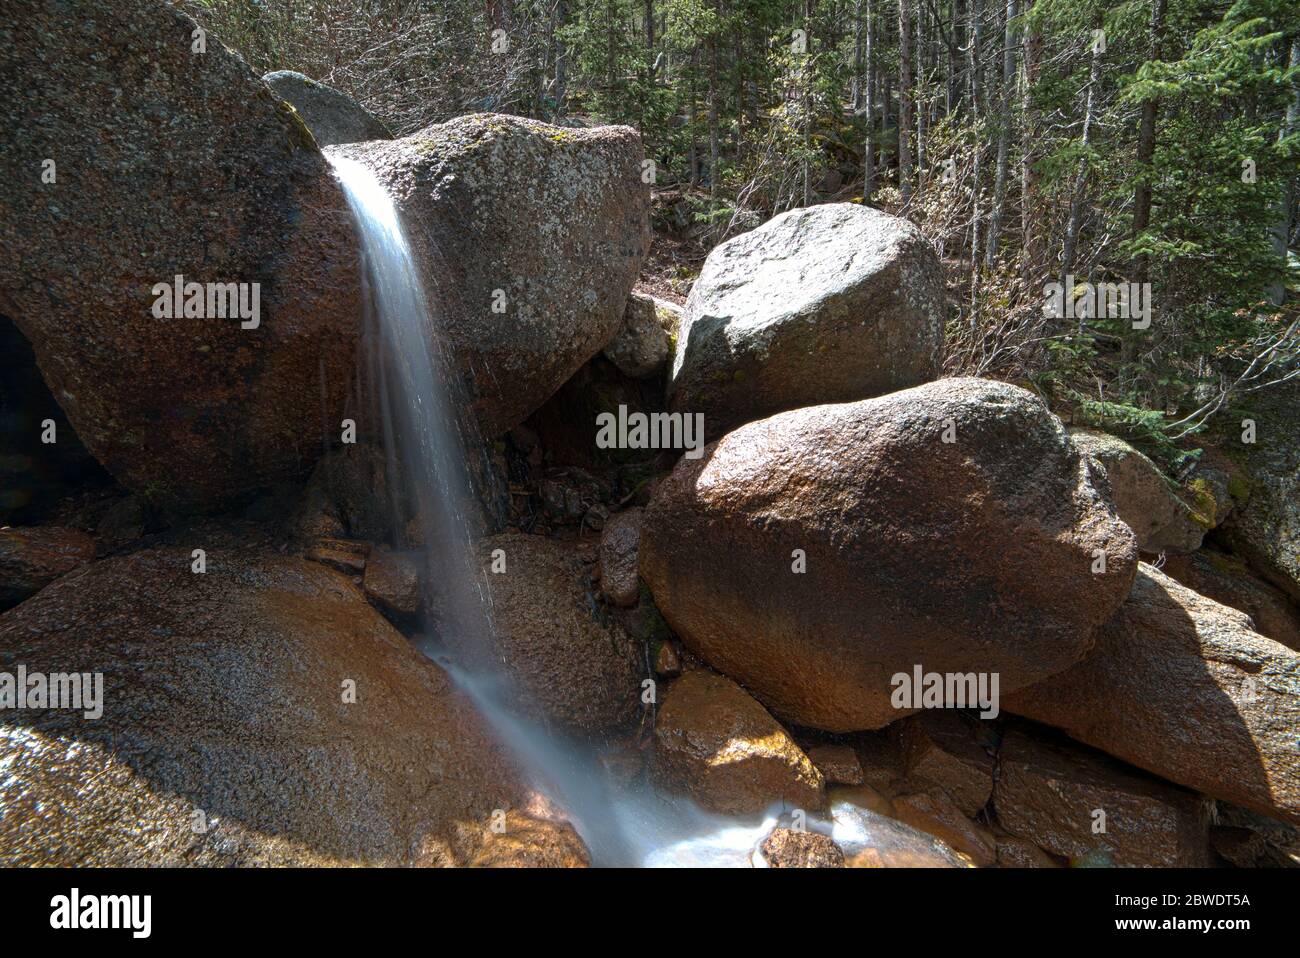 Horsethief Falls at Horsethief Falls Trail, Pike National Forest, Divide, Colorado, Long Exposure Waterfall Photo Stock Photo